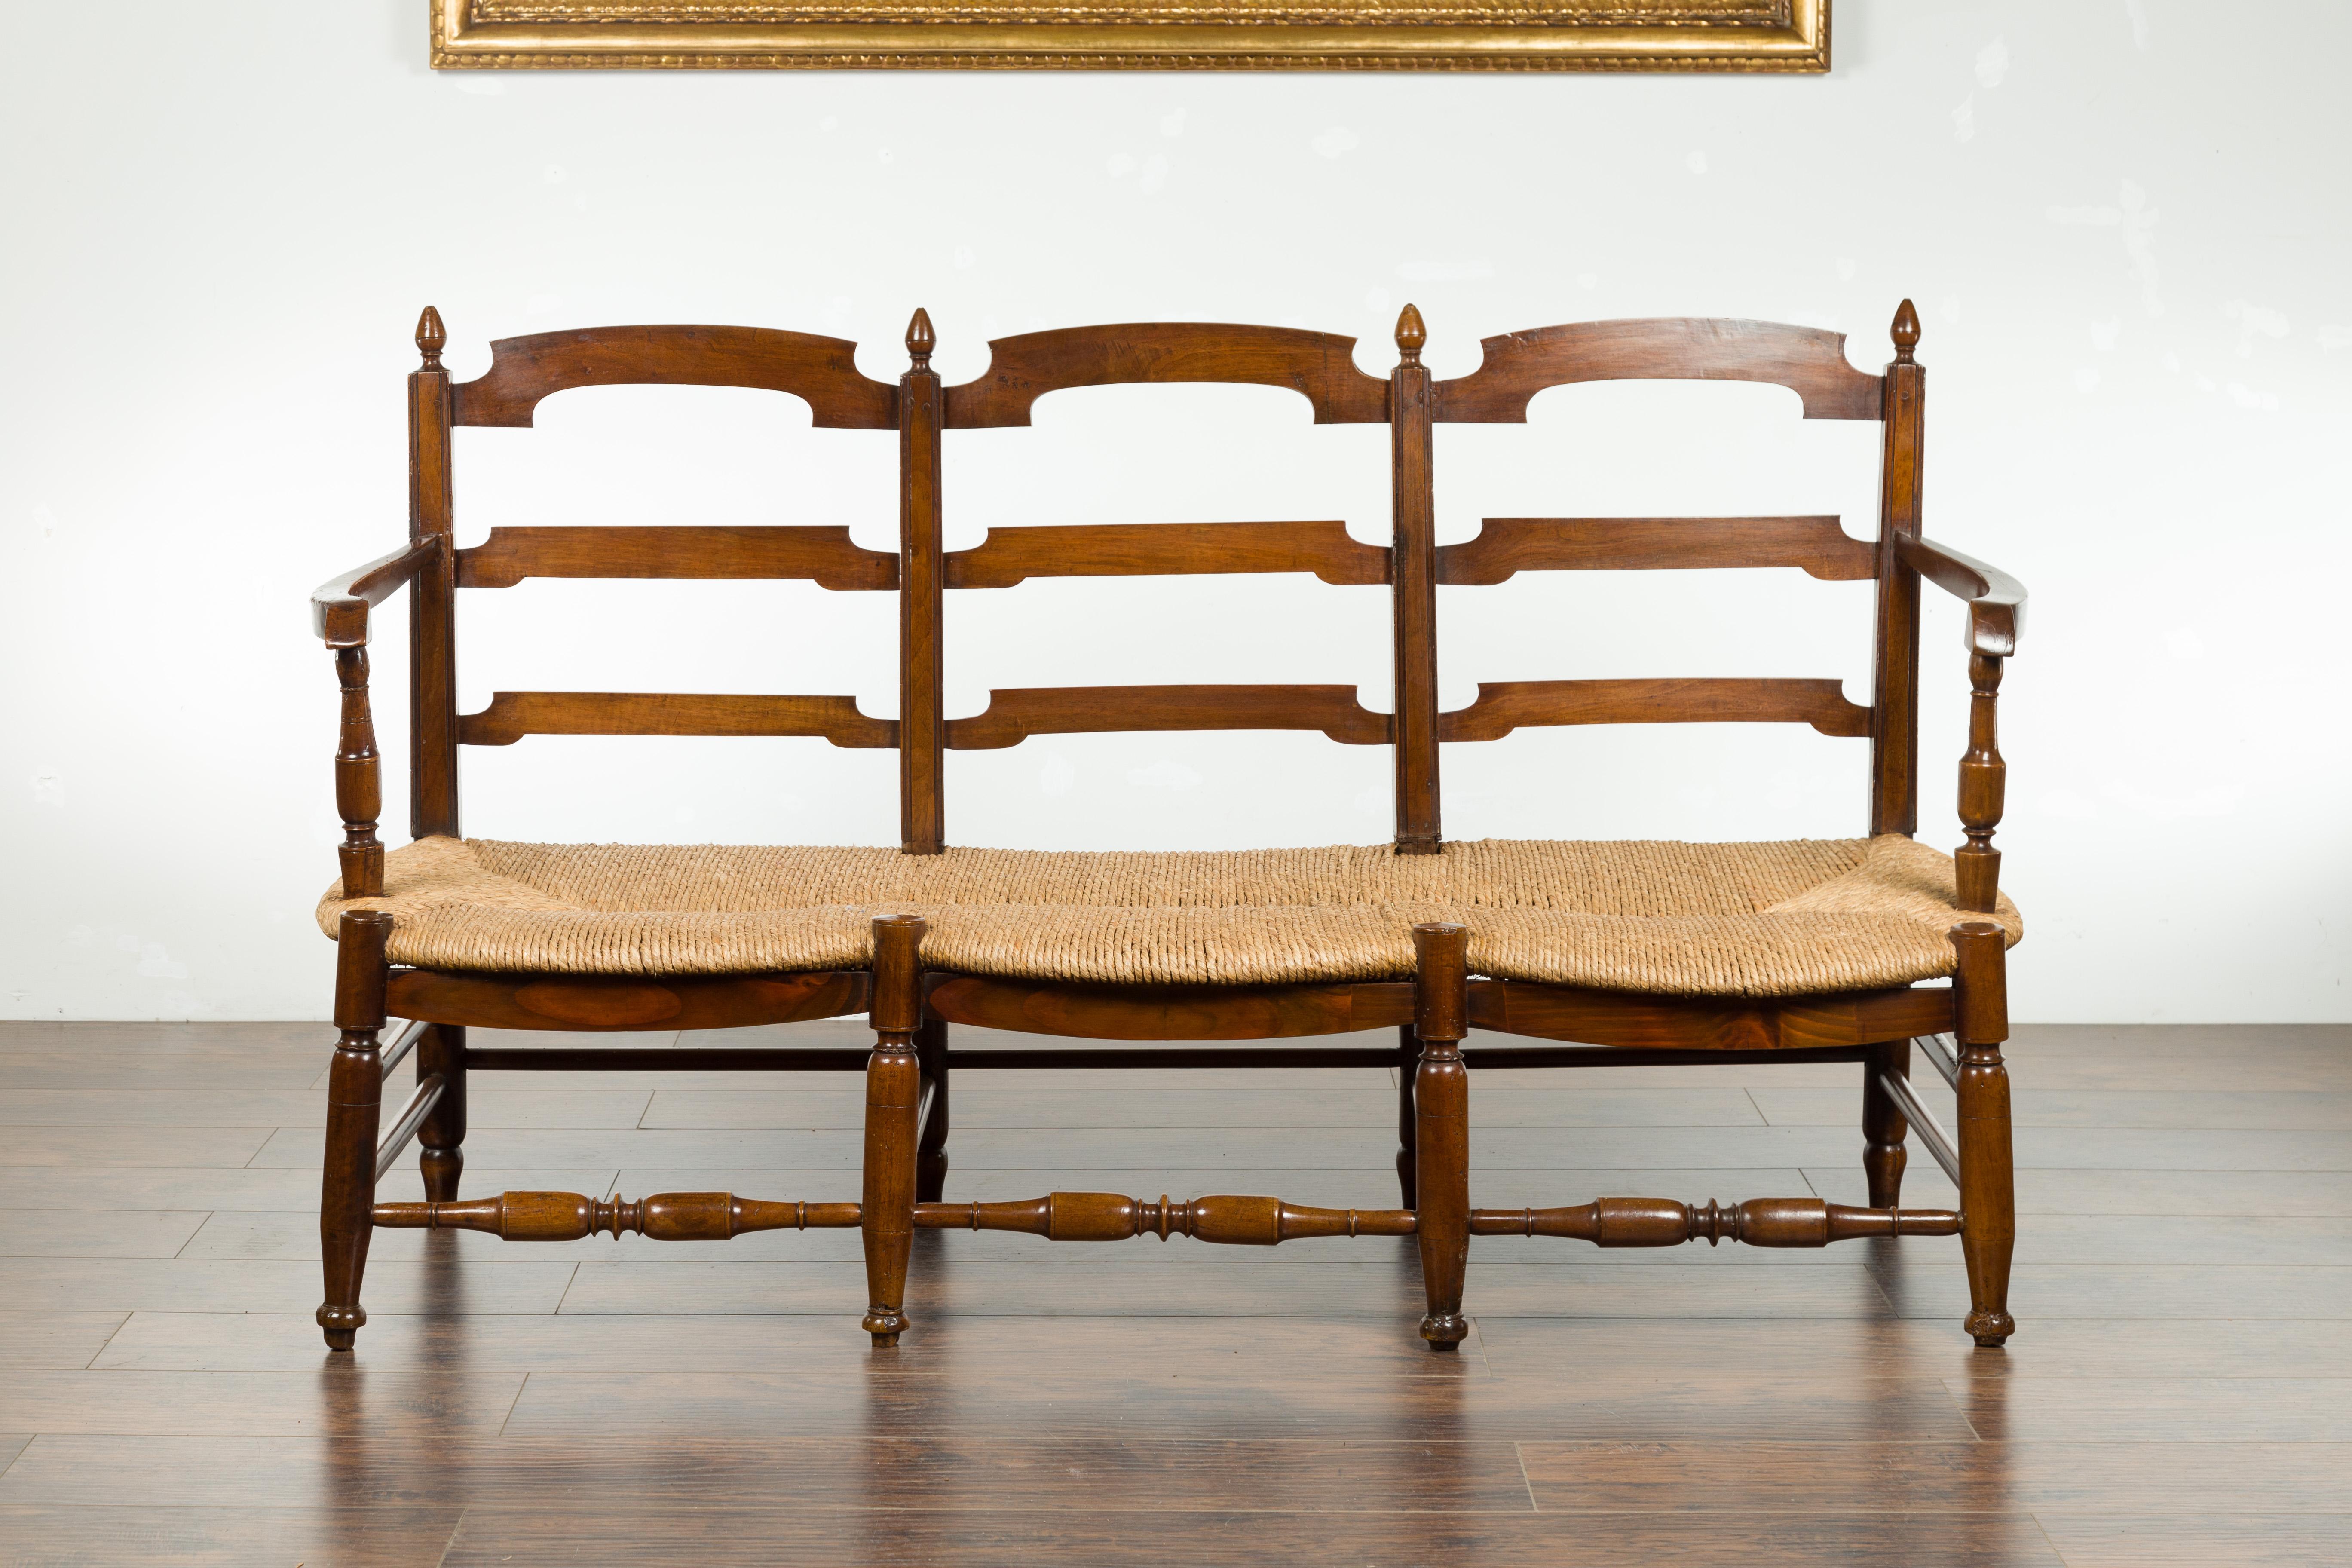 A French walnut bench from the 19th century, with open back and rush seat. Created in France during the 19th century, this walnut bench features an open ladder style back, connected to two arms with turned supports, resting on a long rectangular